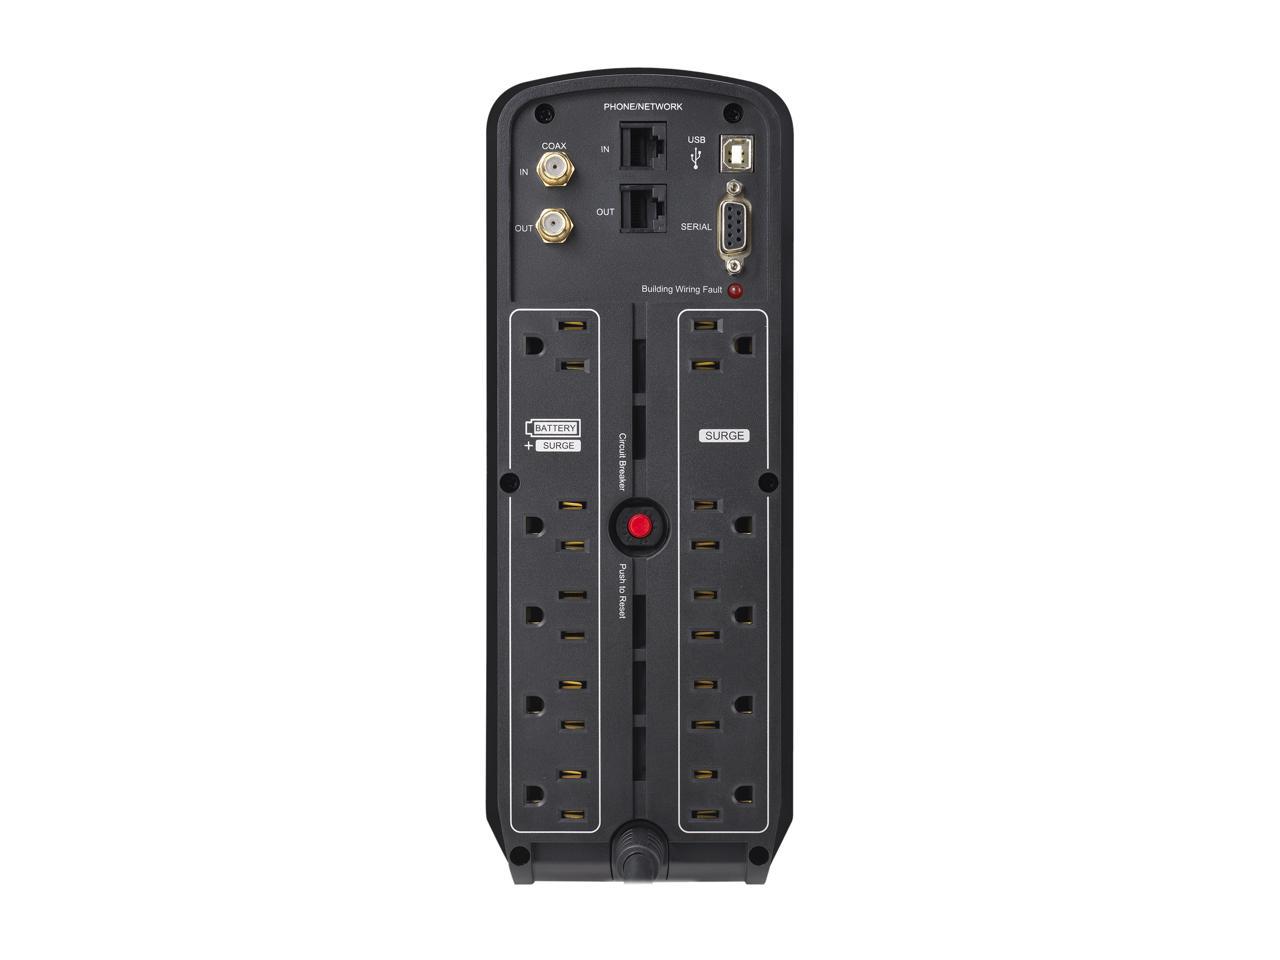 CyberPower 1325 VA 810 Watts 10 Outlets UPS, Pure Sine Wave UPS with USB Charging Ports GX1325U